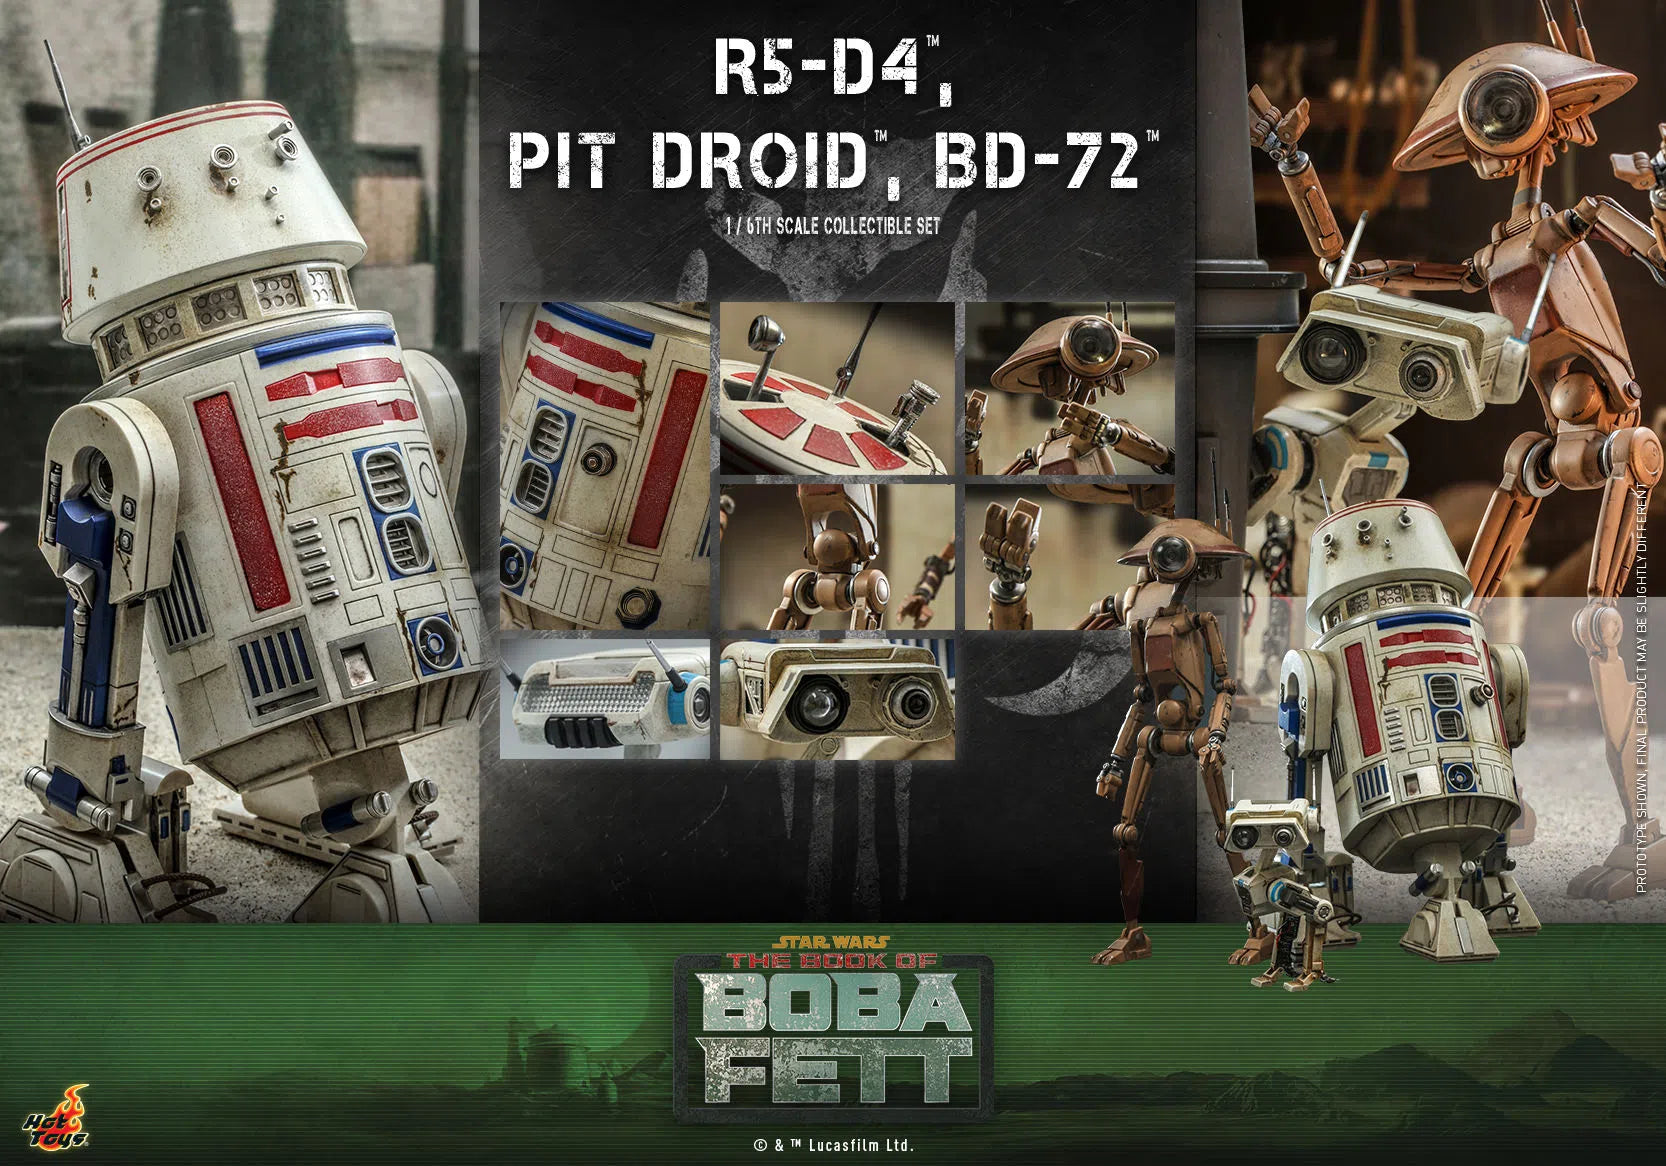 R5-D4, Pit Droid & BD-72: Star Wars: The Book Of Boba Fett: Hot Toys